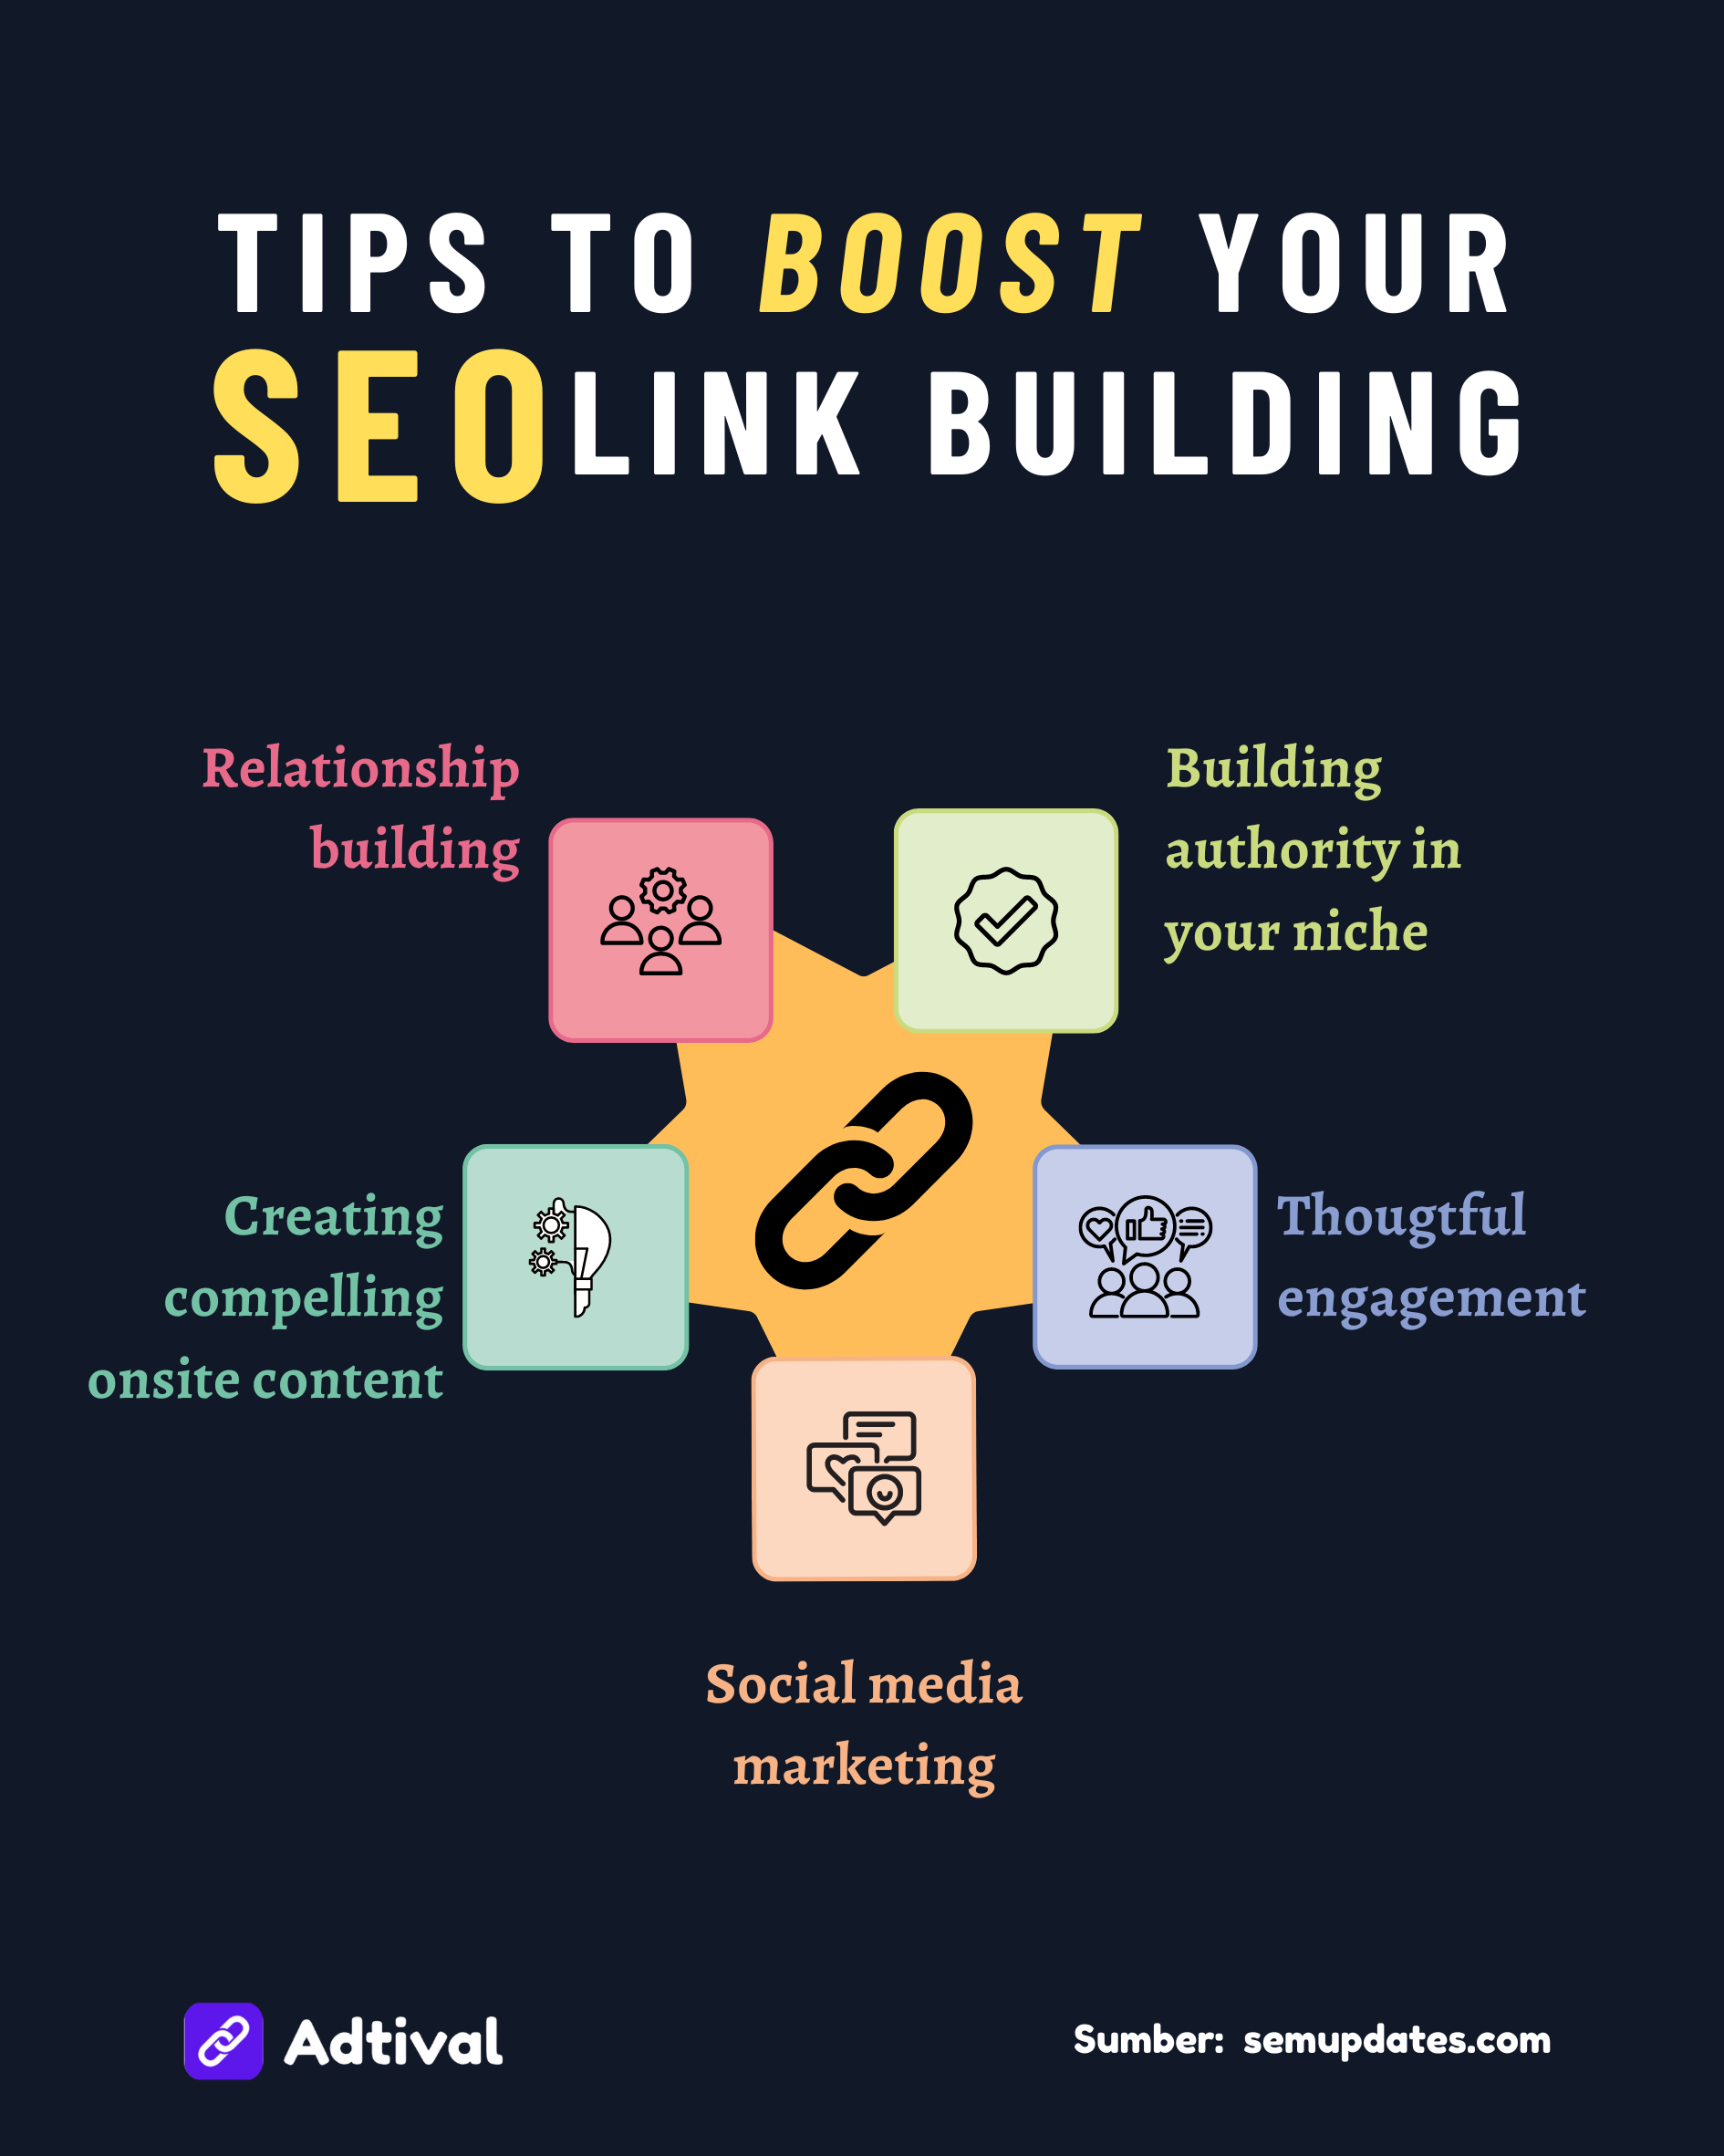 Tips to Boost Your SEO Link Building